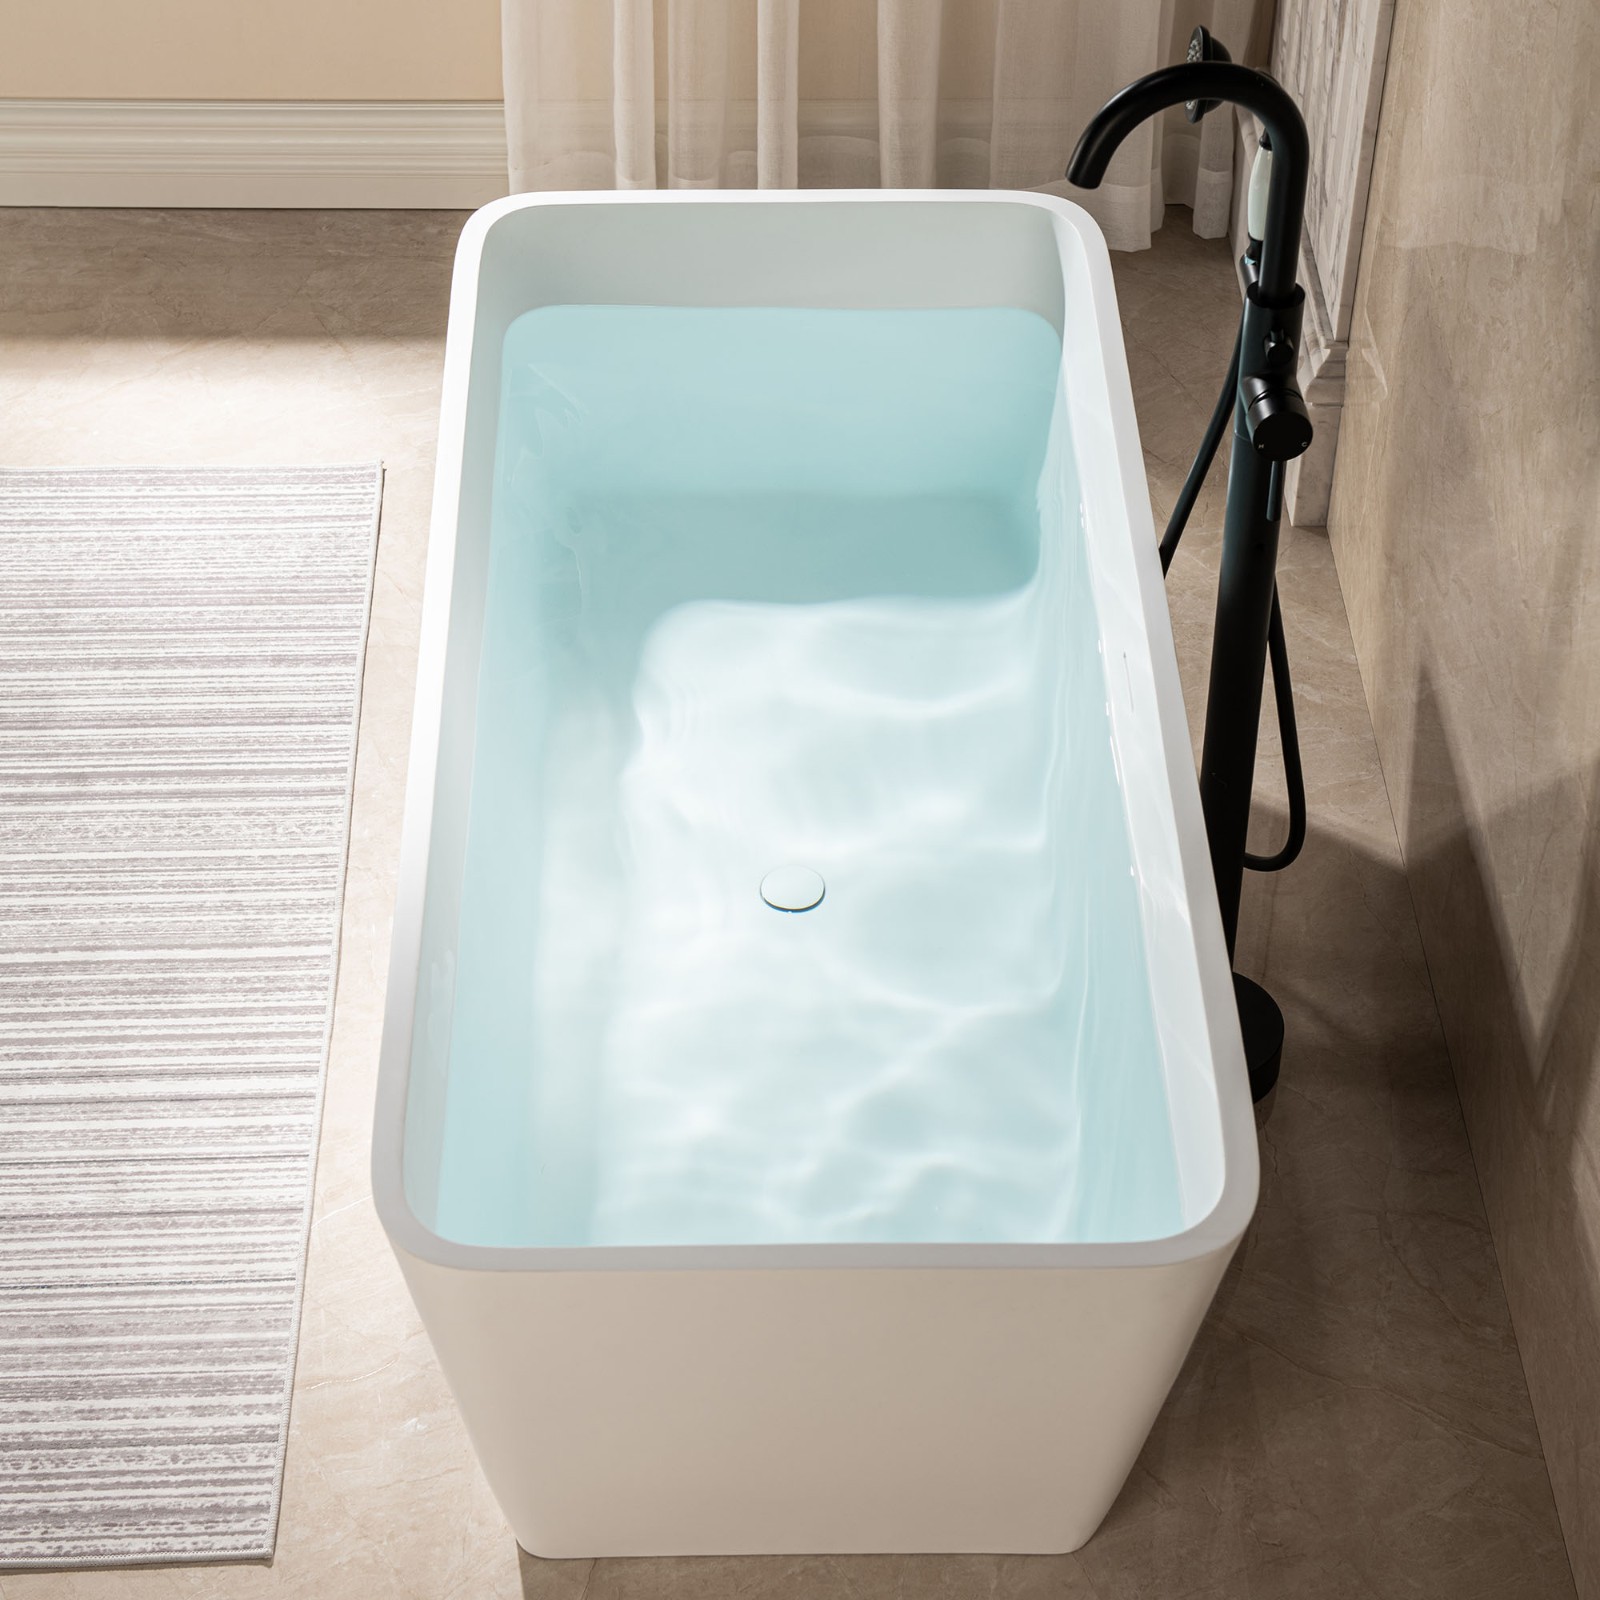  WOODBRIDGE 59 in. x 27.5 in. Luxury Contemporary Solid Surface Freestanding Bathtub in Matte White_3